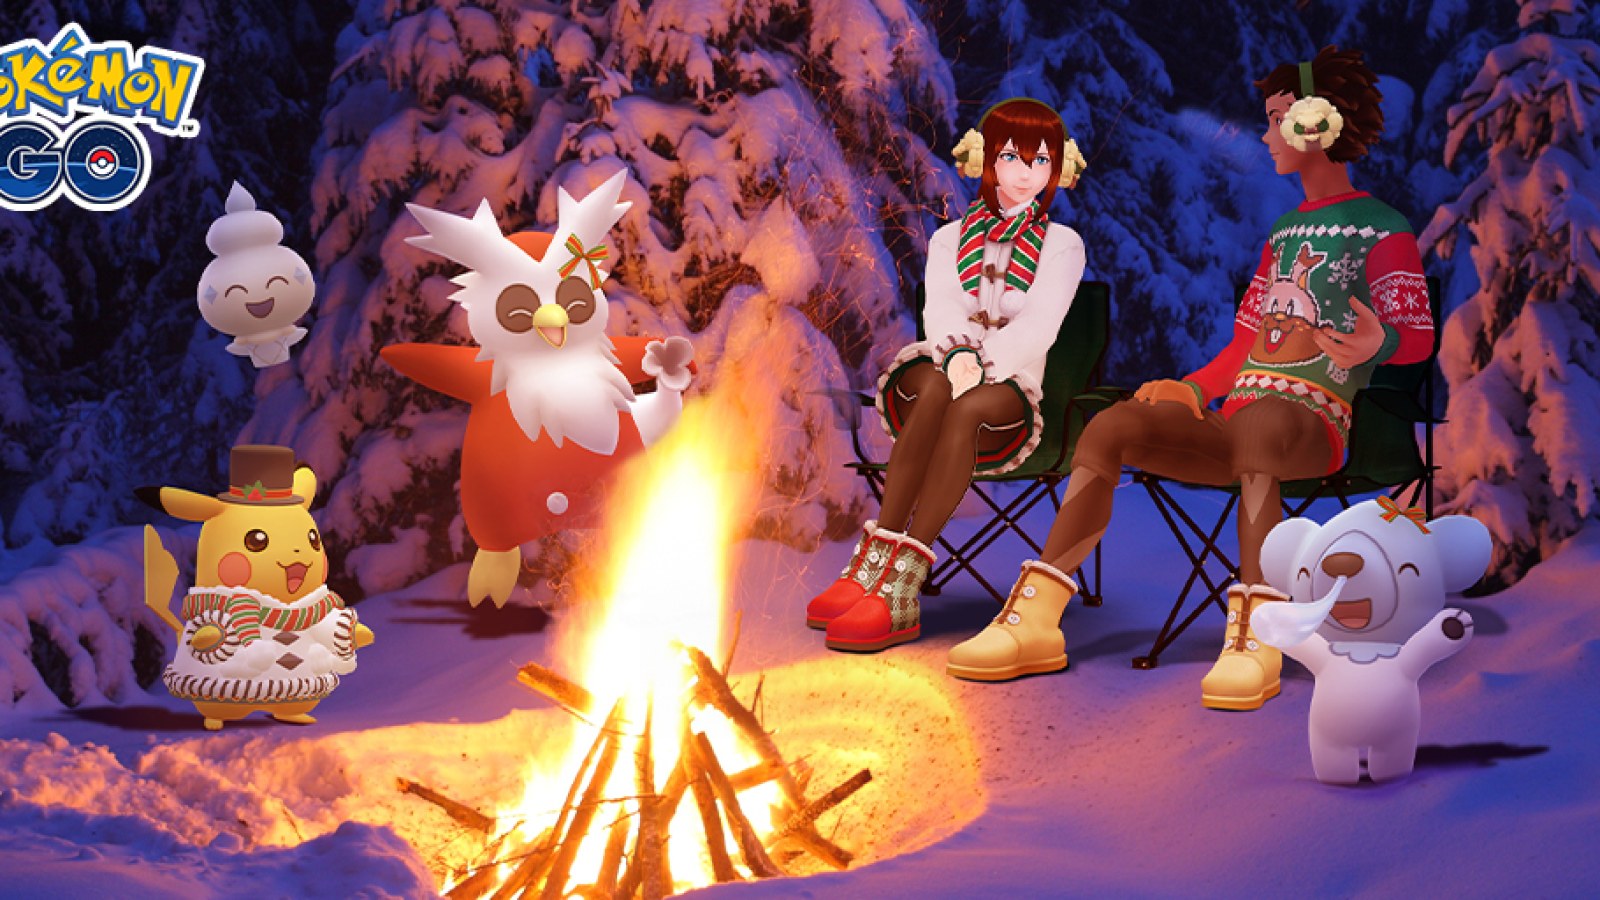 Pokémon Go' Holiday Event: Start Time, Field Research, Vanillite and More